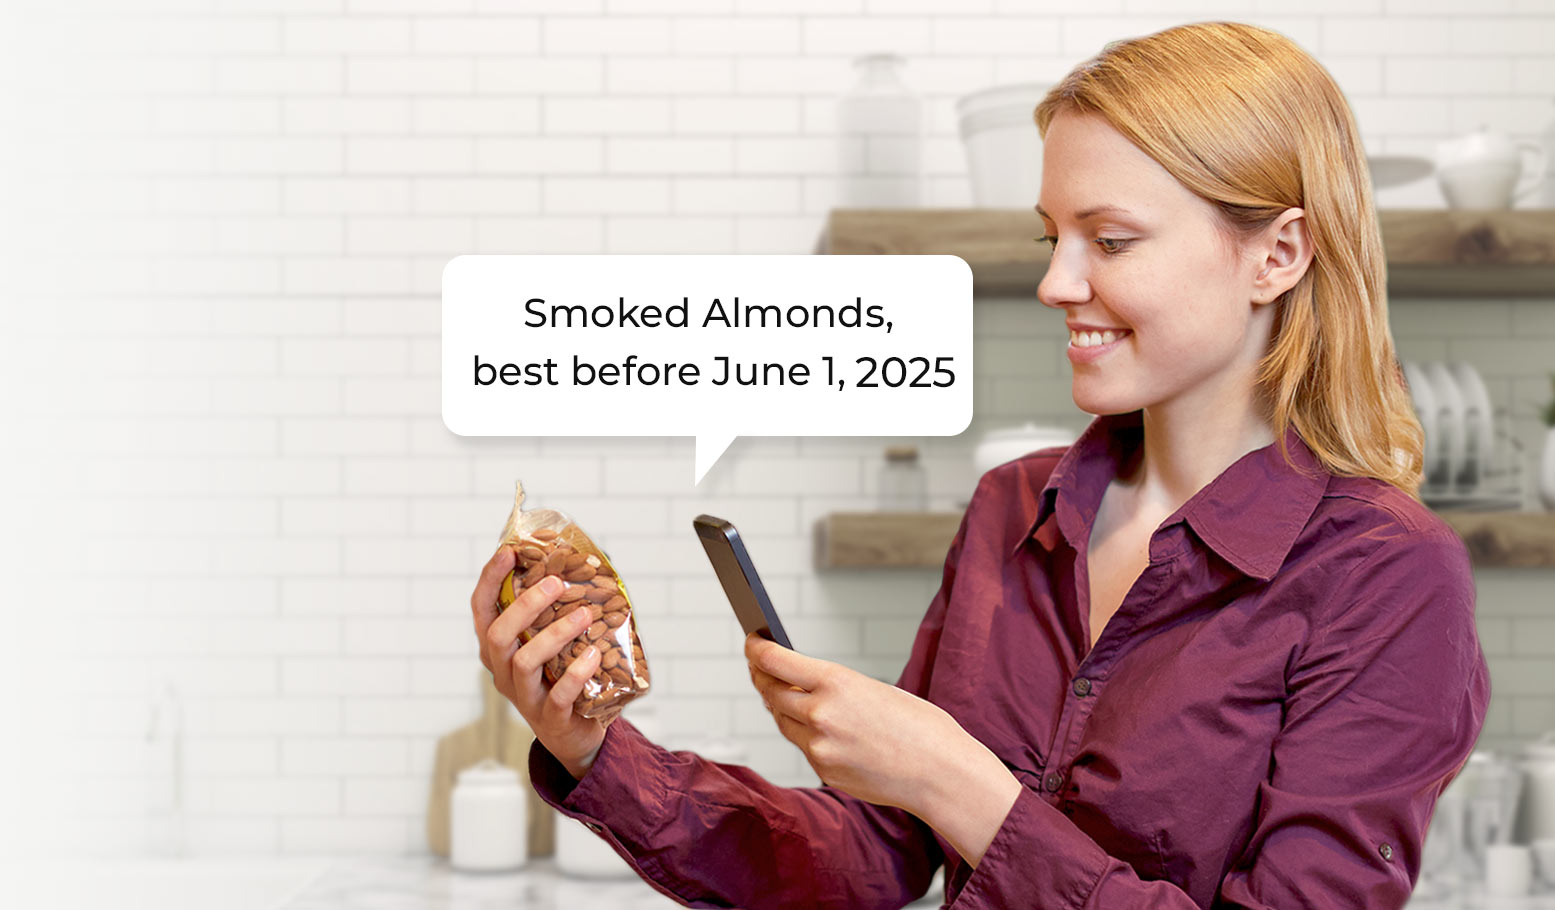 Woman holding phone up to bag of almonds. A speech bubble from the phone says: Smoked Almonds, expires June 1, 2020